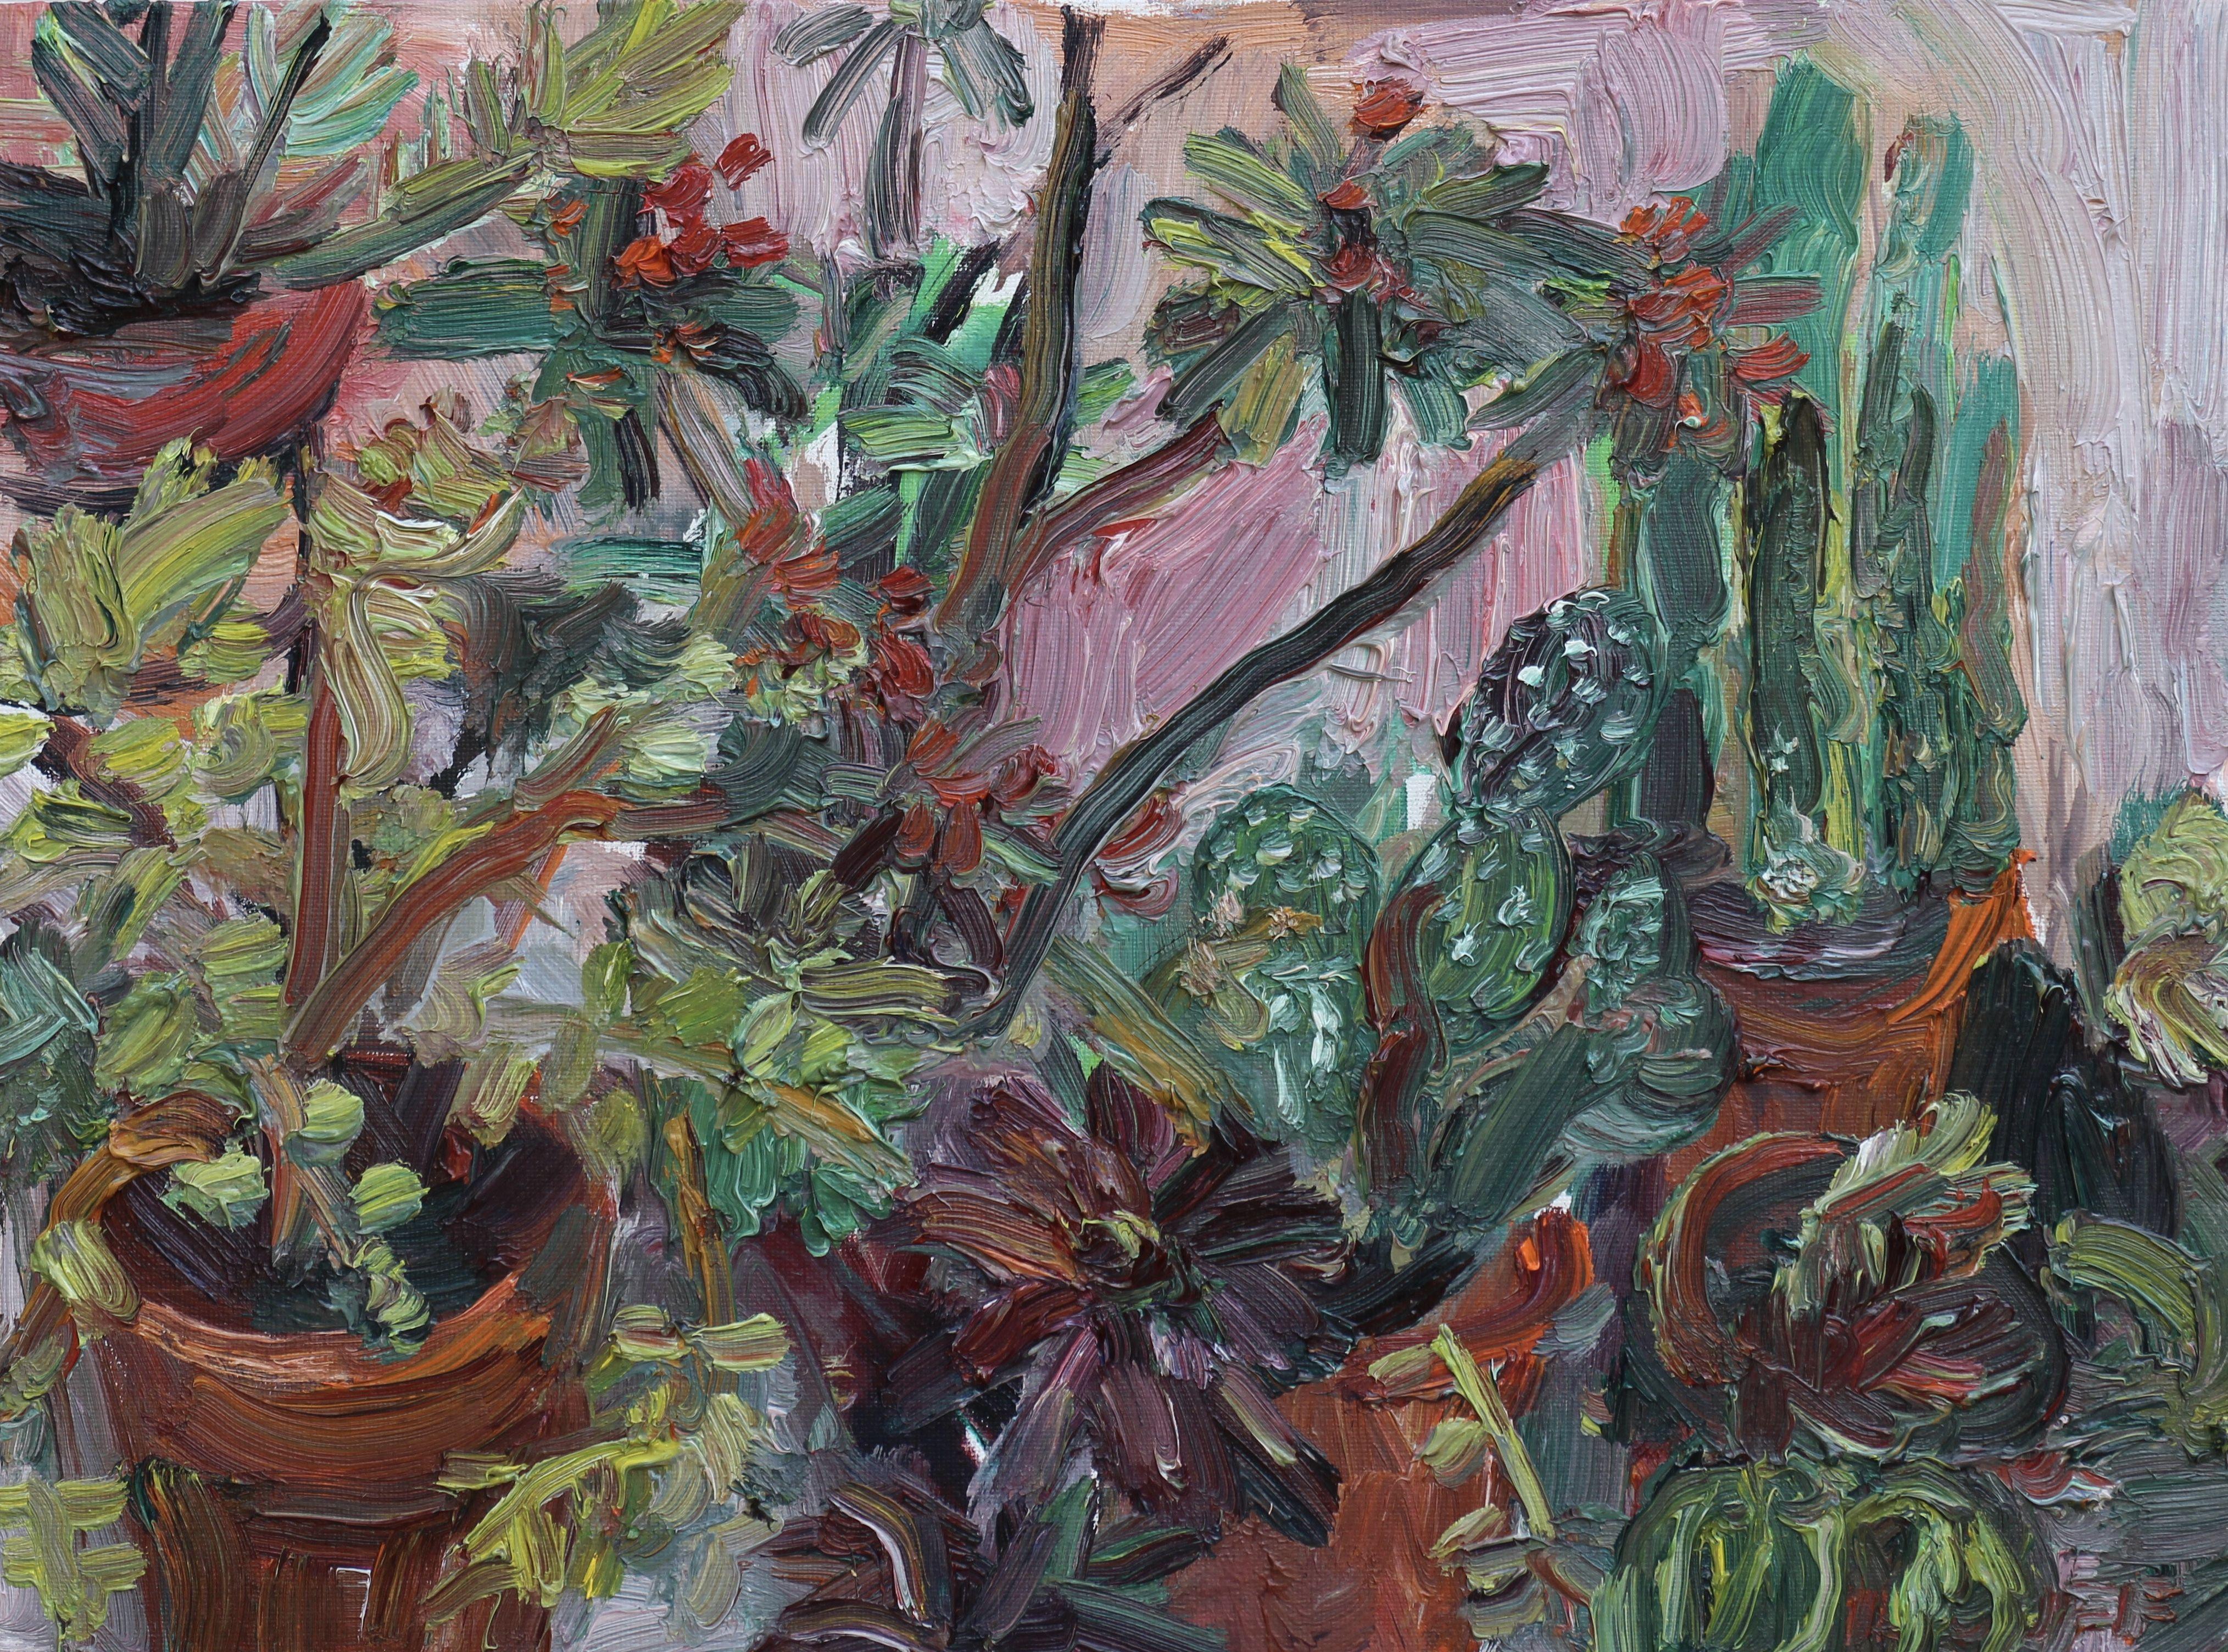 Plein air oil painting of the cactus plants in the backyard. I also painted on another painting at the same time (cactus plants oil #2) which is also listed separately. I made a video of the process, which can be viewed on Youtube: /Dd78ghZ-wVs  The